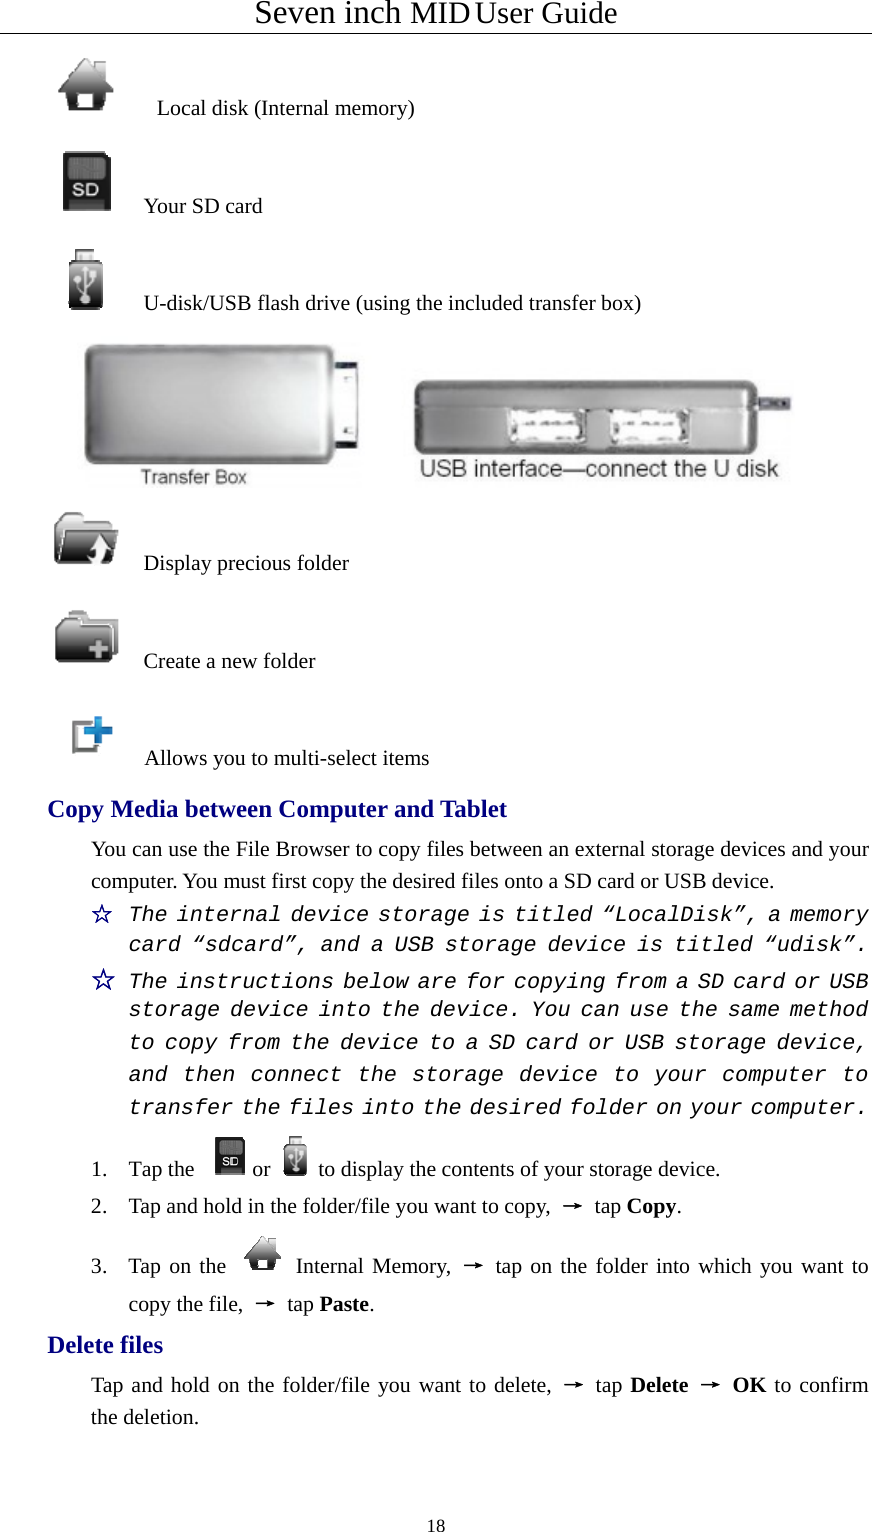 Seven inch MID User Guide  18      Local disk (Internal memory)   Your SD card     U-disk/USB flash drive (using the included transfer box)    Display precious folder   Create a new folder     Allows you to multi-select items Copy Media between Computer and Tablet You can use the File Browser to copy files between an external storage devices and your computer. You must first copy the desired files onto a SD card or USB device. ☆  The internal device storage is titled “LocalDisk”, a memory card “sdcard”, and a USB storage device is titled “udisk”. ☆ The instructions below are for copying from a SD card or USB storage device into the device. You can use the same method to copy from the device to a SD card or USB storage device, and then connect the storage device to your computer to transfer the files into the desired folder on your computer. 1. Tap the  or to display the contents of your storage device. 2. Tap and hold in the folder/file you want to copy,  → tap Copy. 3. Tap on the   Internal Memory, → tap on the folder into which you want to copy the file,  → tap Paste. Delete files Tap and hold on the folder/file you want to delete, → tap Delete → OK to confirm the deletion. 